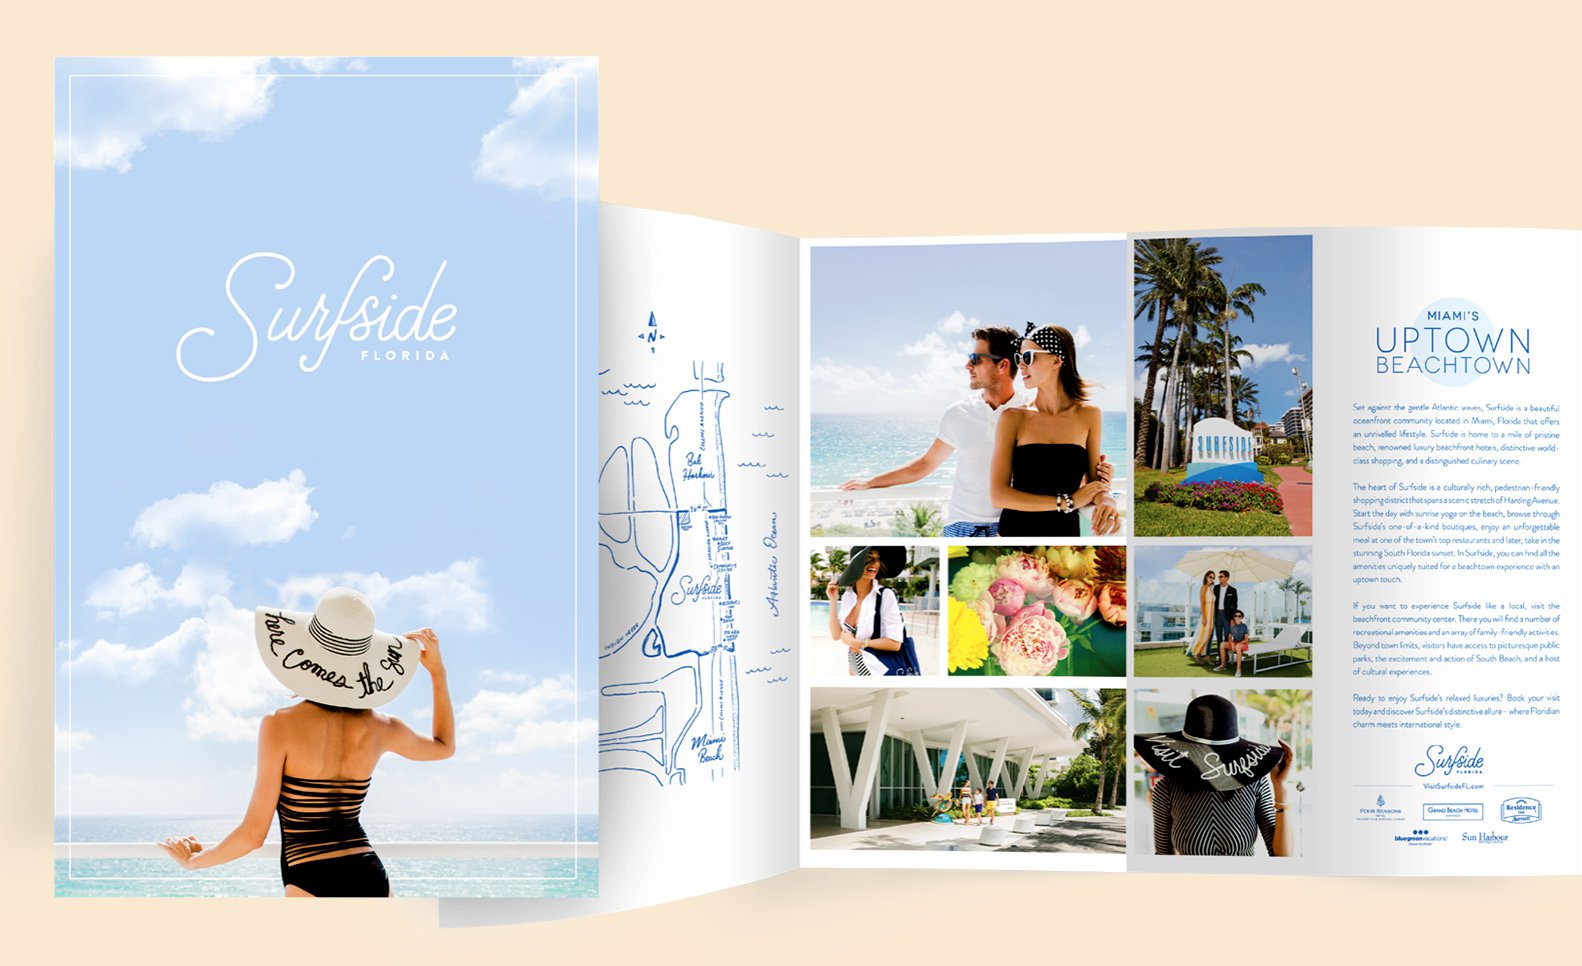 Jacober Creative Identity and Campaign for the Town of Surfside Florida - Photo of custom printed brochure